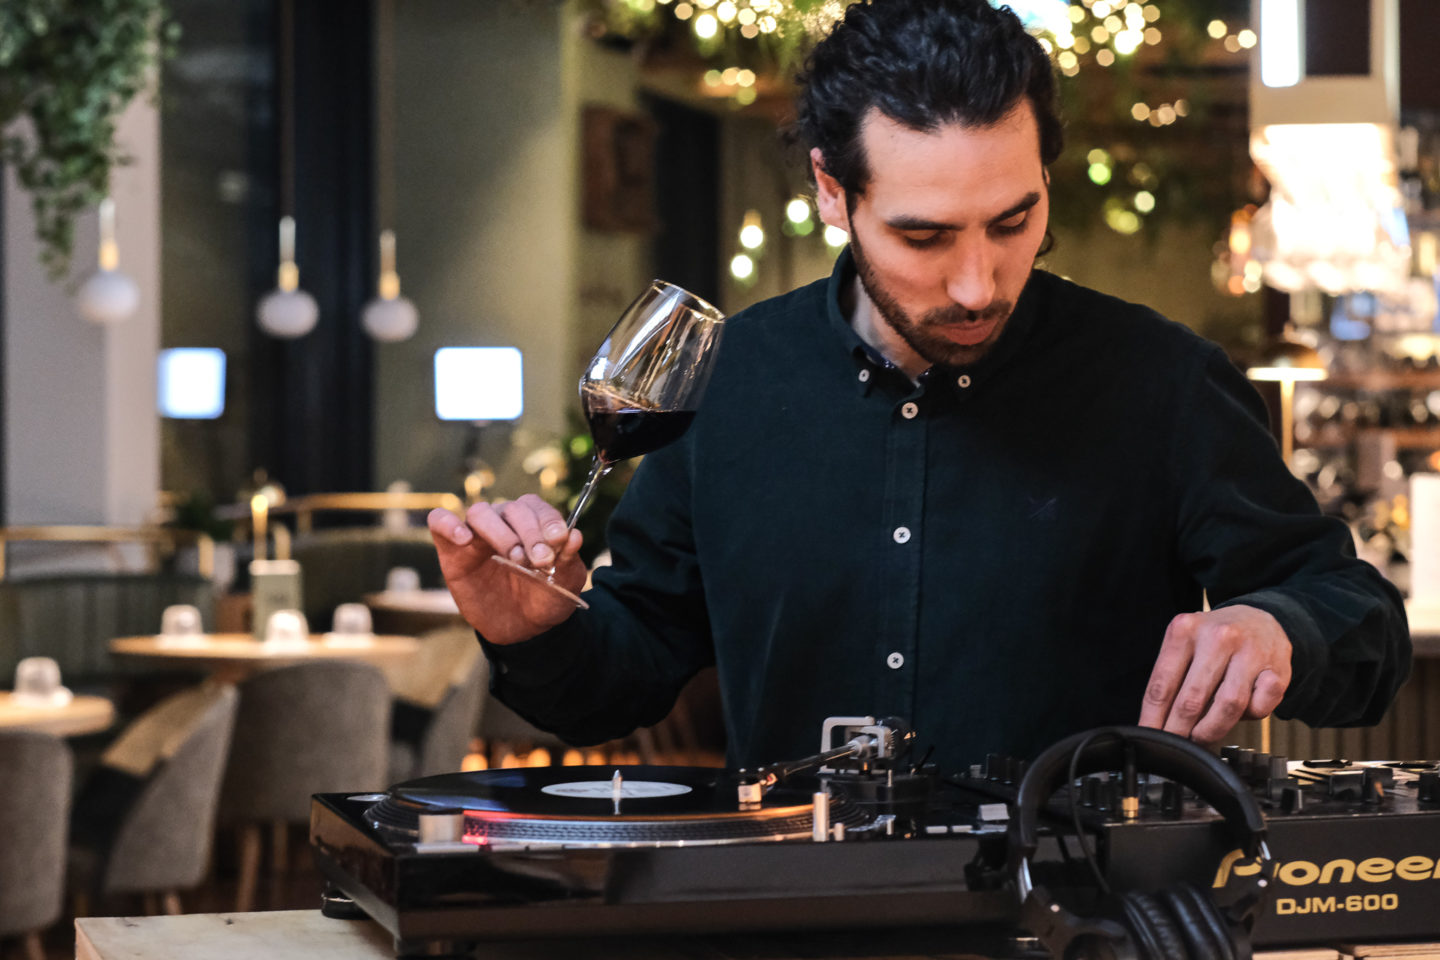 A man holding a glass of red wine plays a record on a turntable